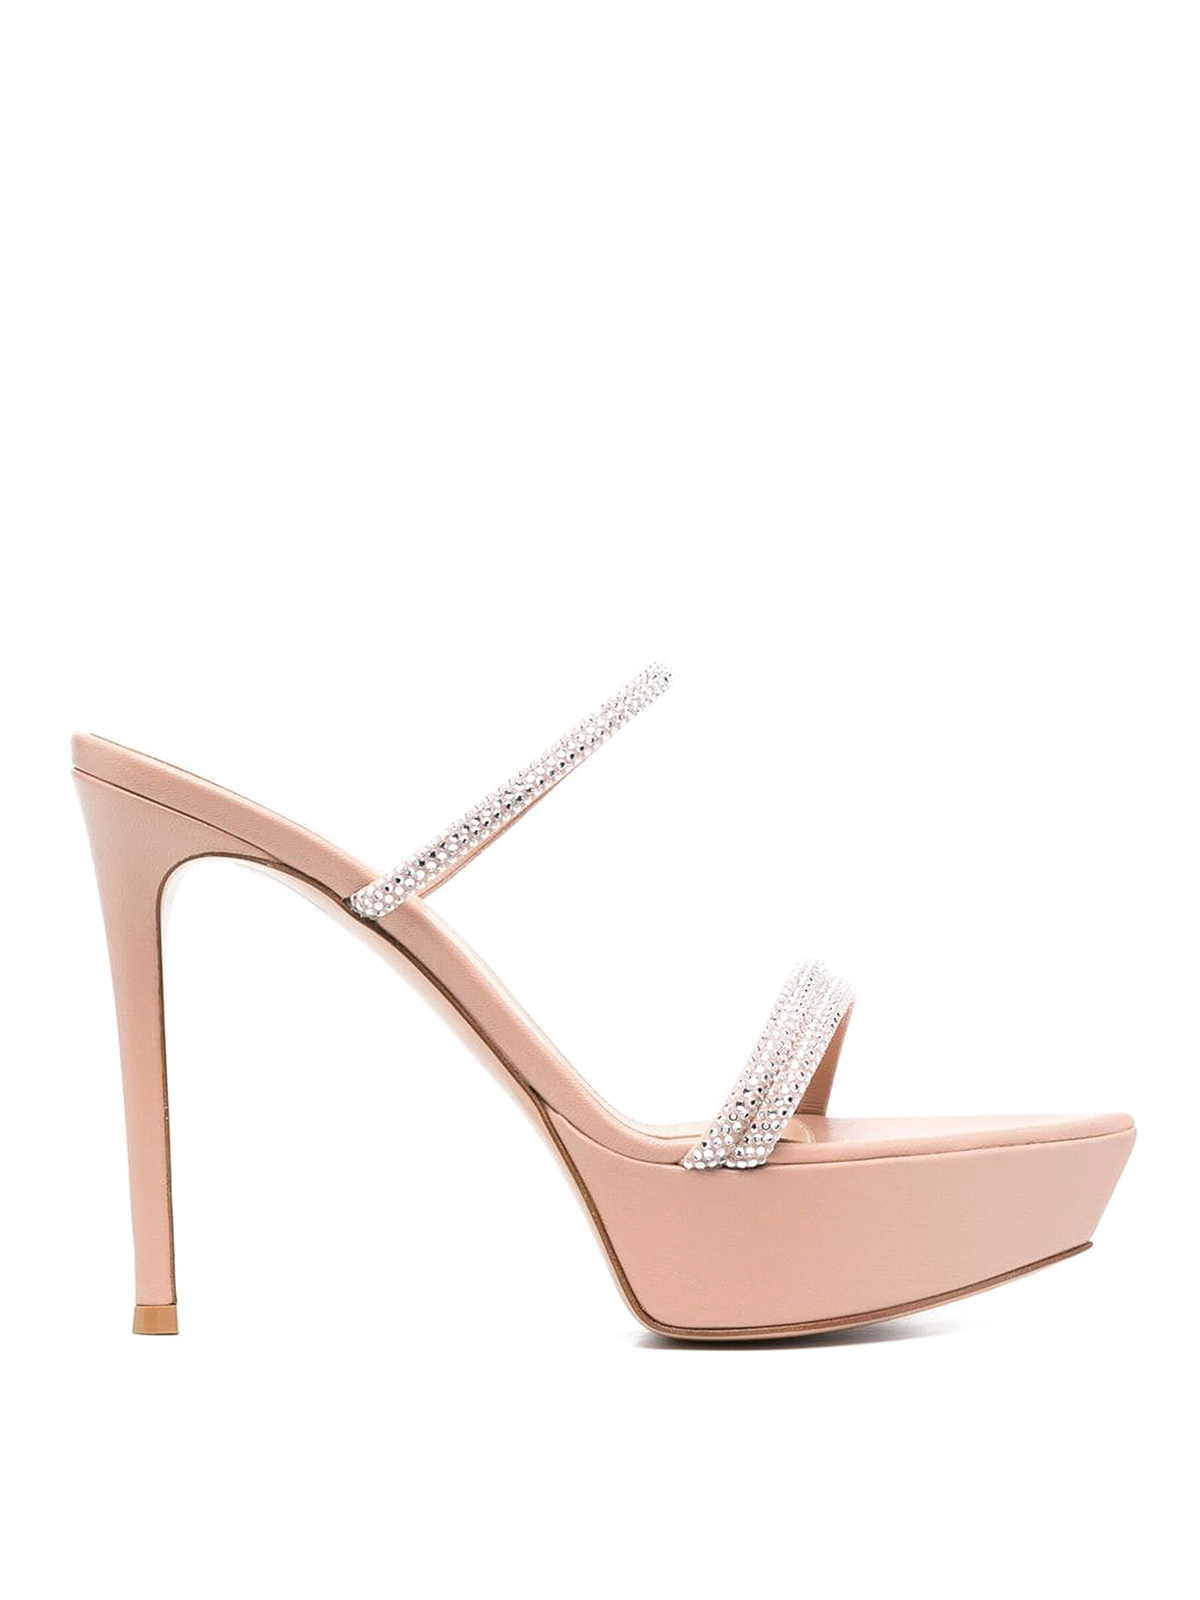 Gianvito Rossi Cannes Platform Sandals In Pink